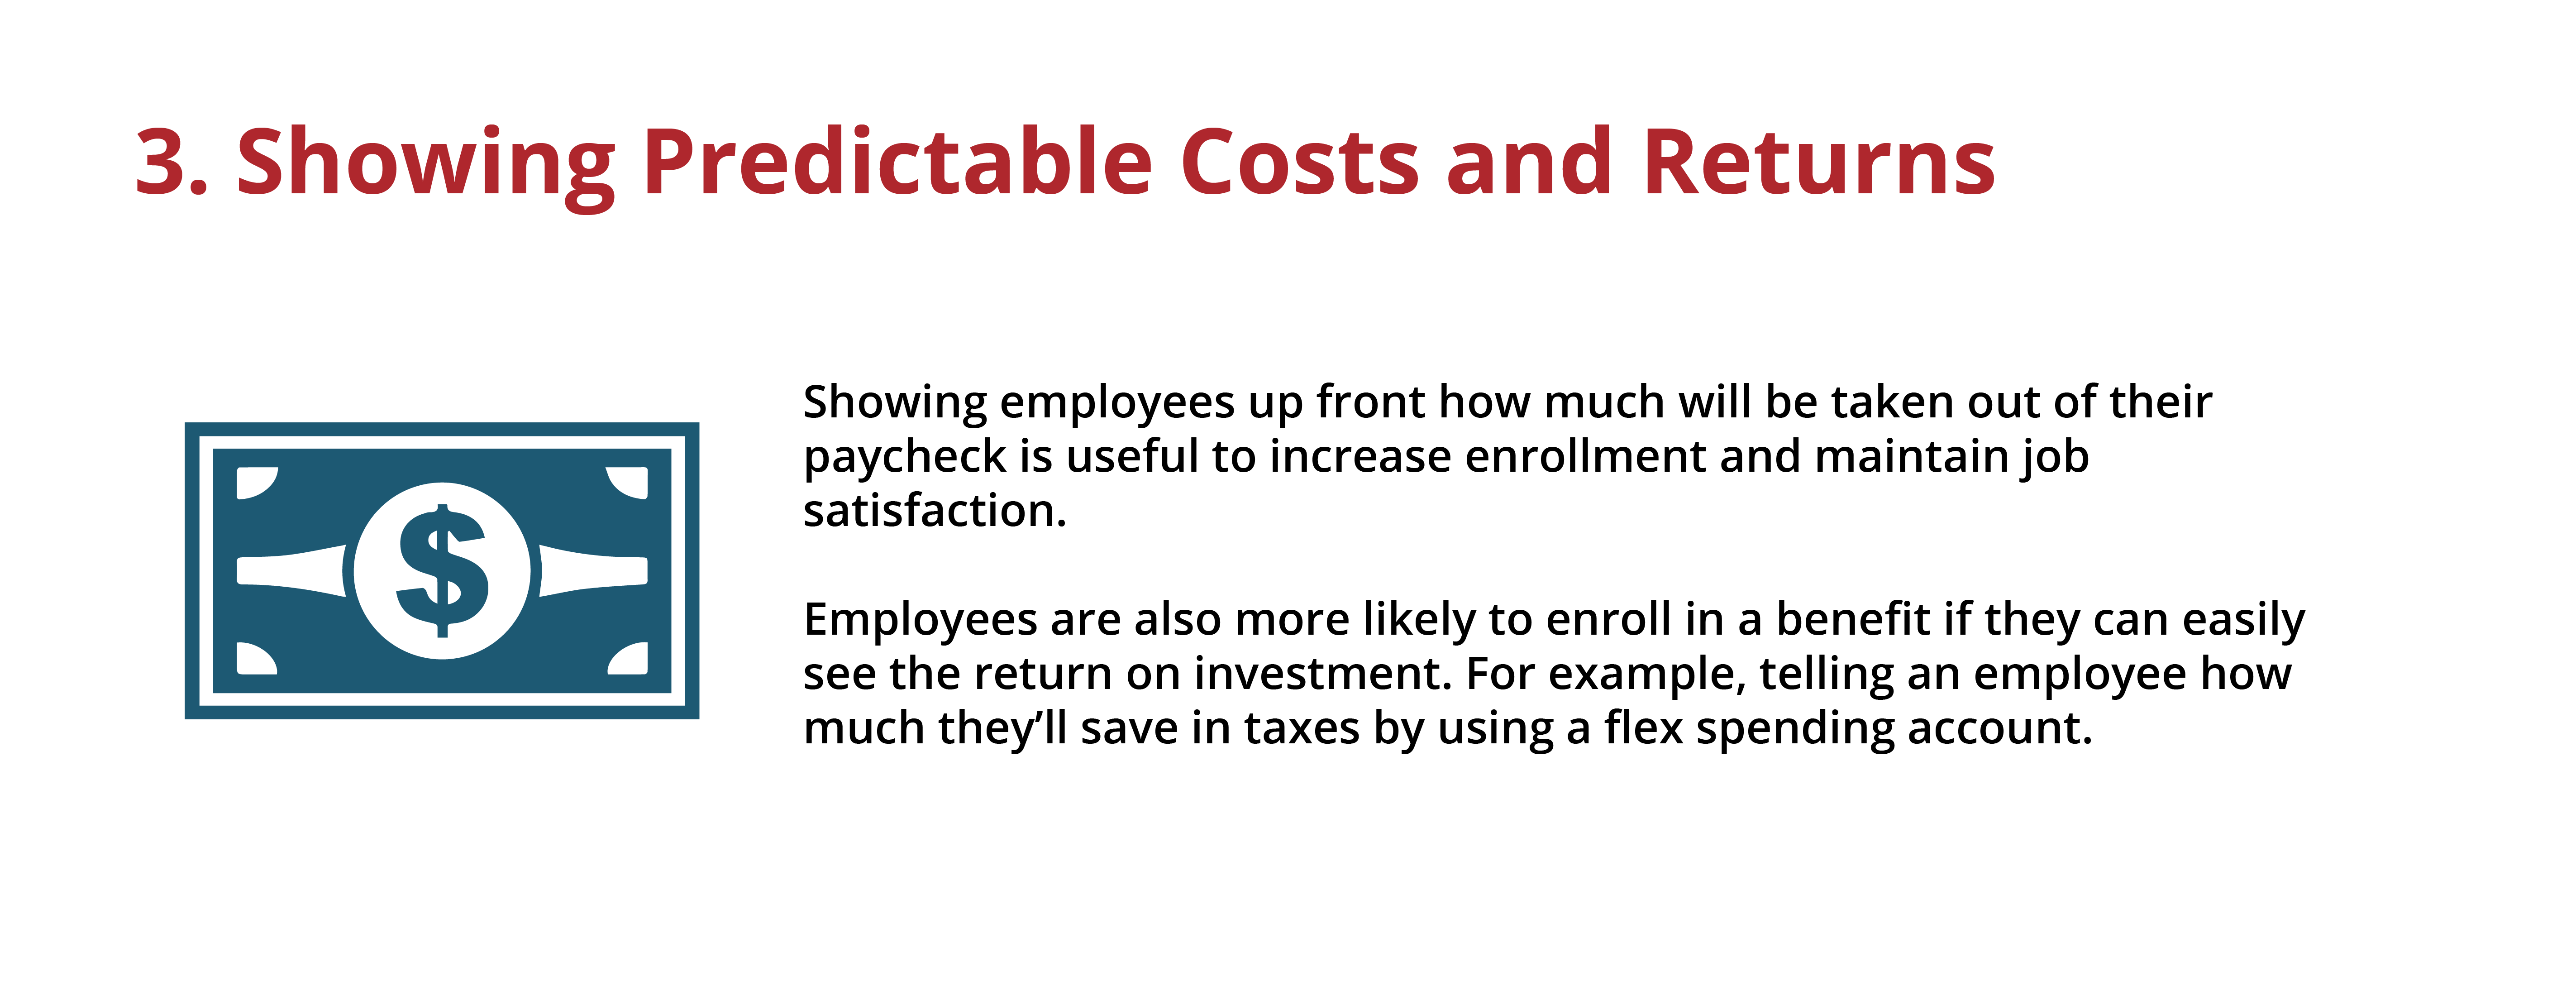 employees are more likely to enroll in a benefit if they see the value